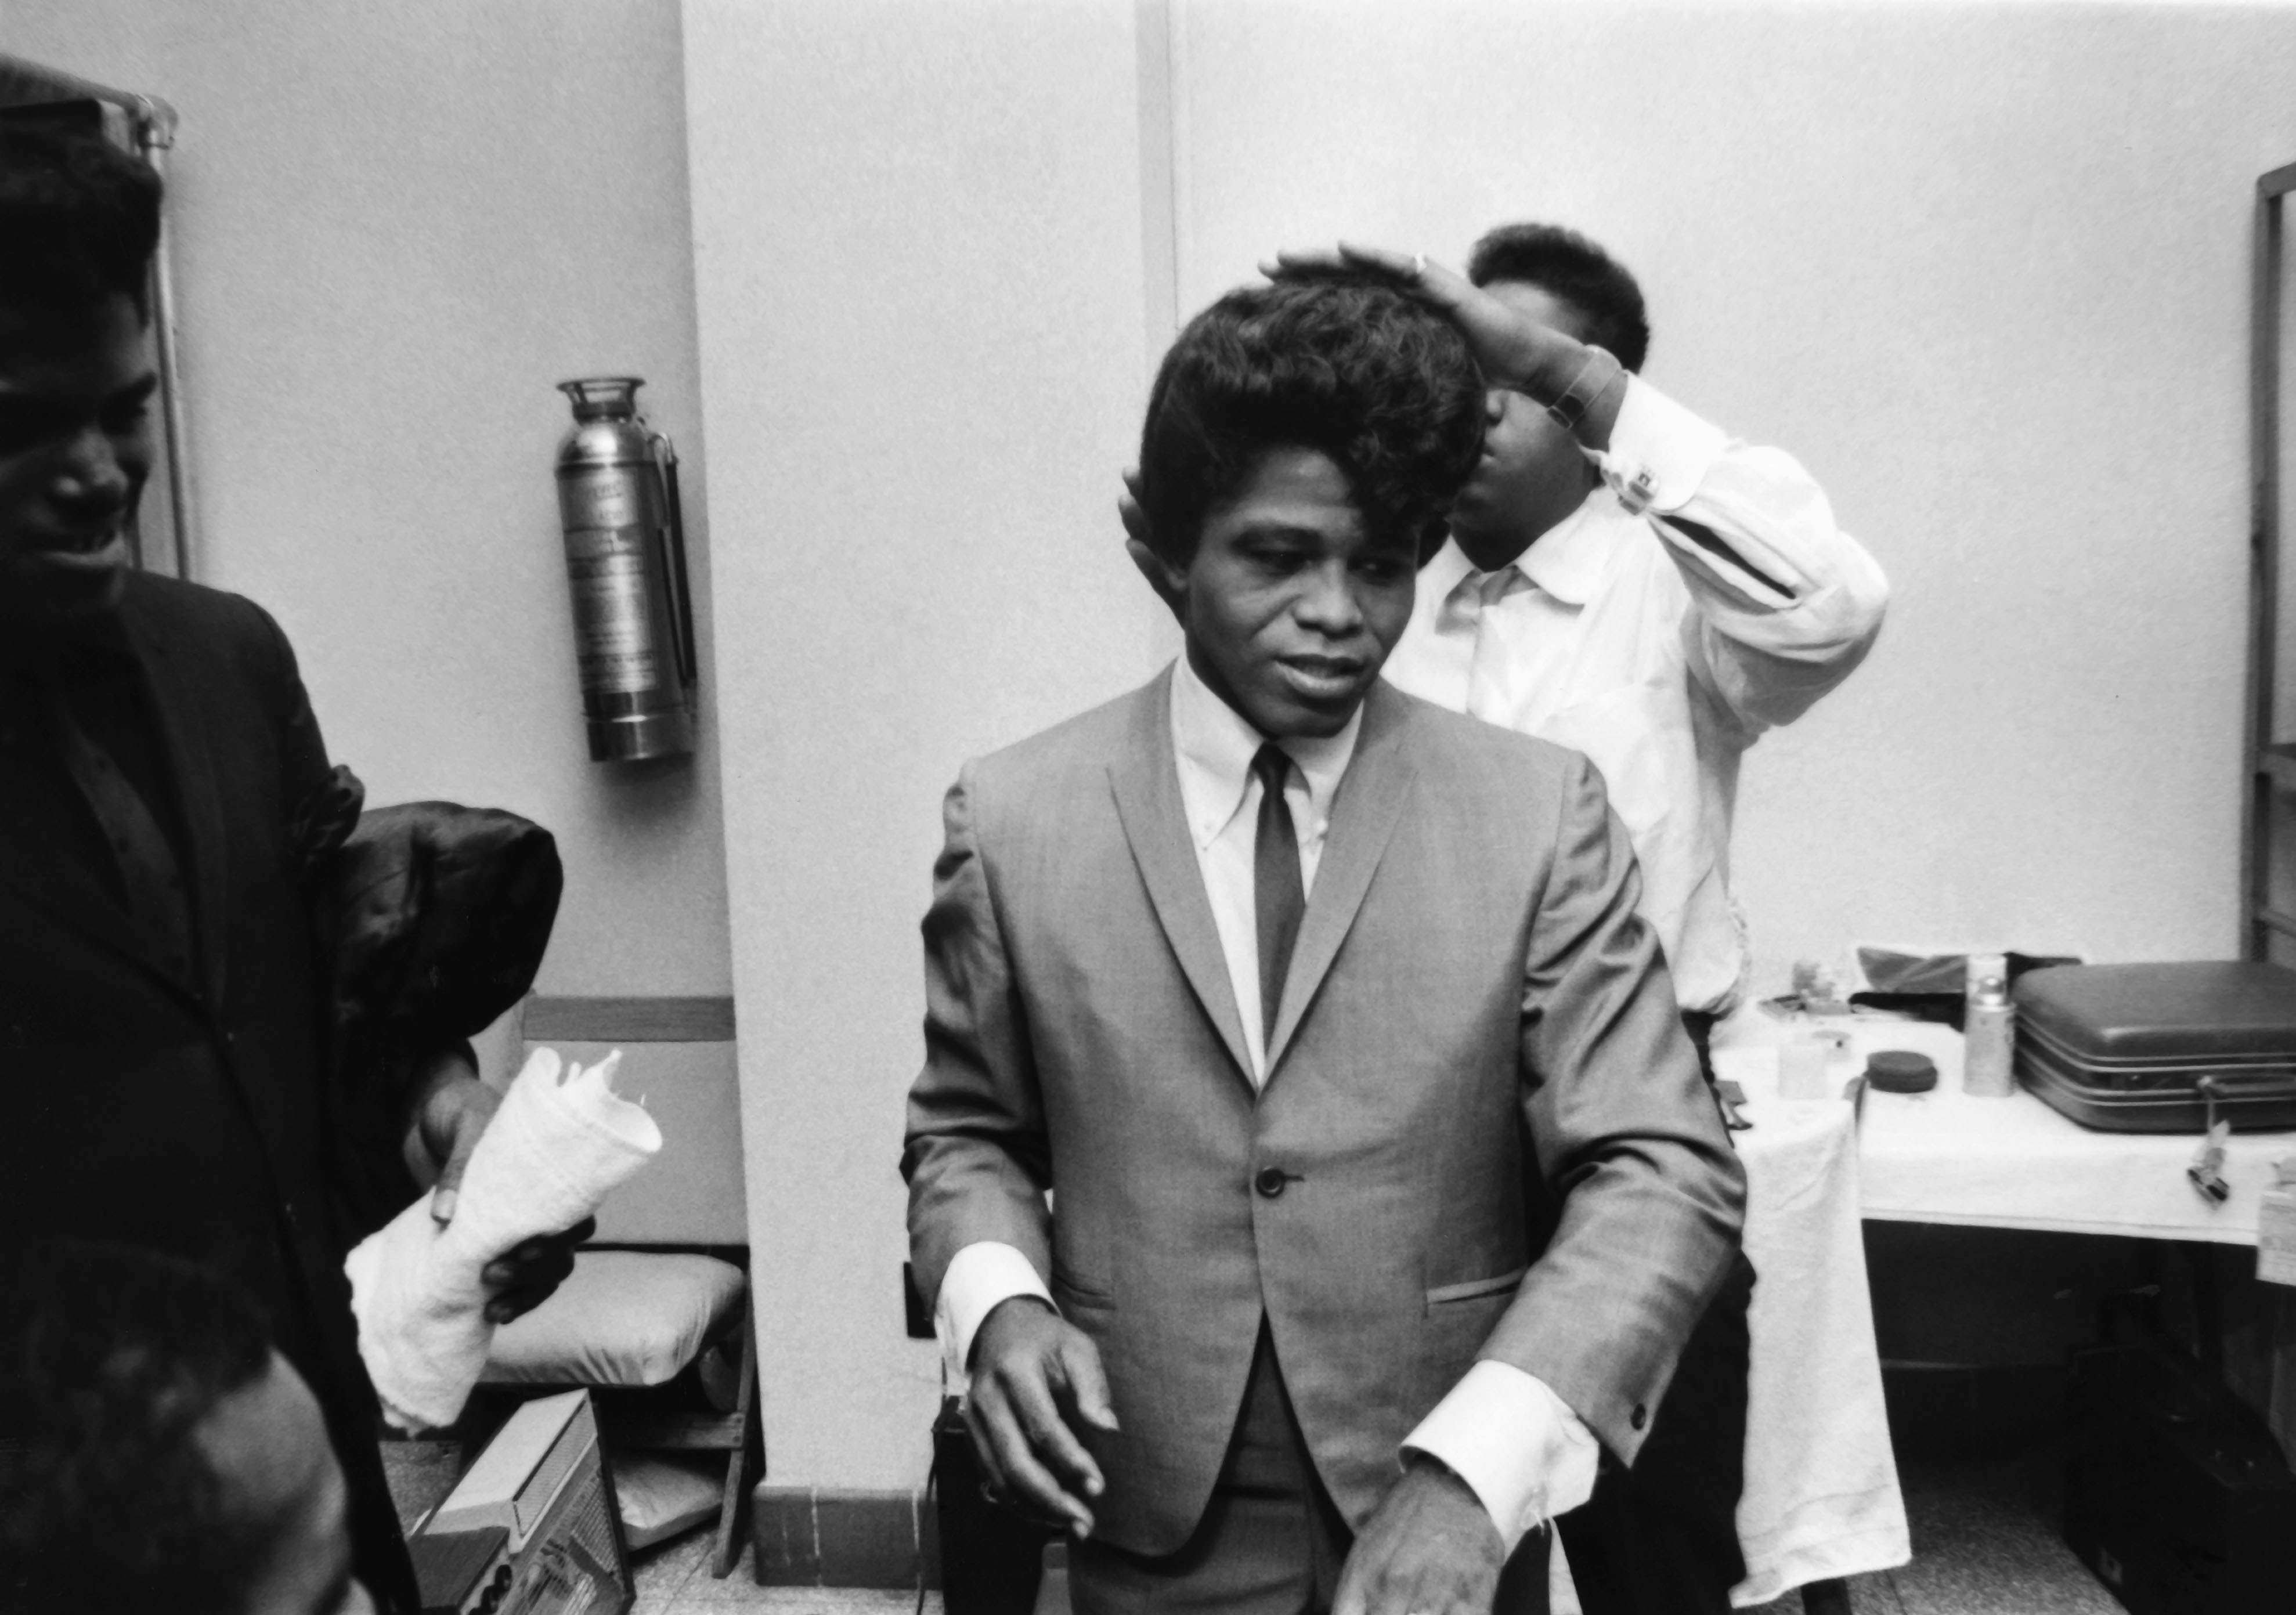 Singer James Brown is captured off stage around Memphis, Tenn. (Ted Williams/Johnson Publishing Company Archive). Courtesy Ford Foundation, J. Paul Getty Trust, John D. and Catherine T. MacArthur Foundation, Andrew W. Mellon Foundation, and Smithsonian Institution